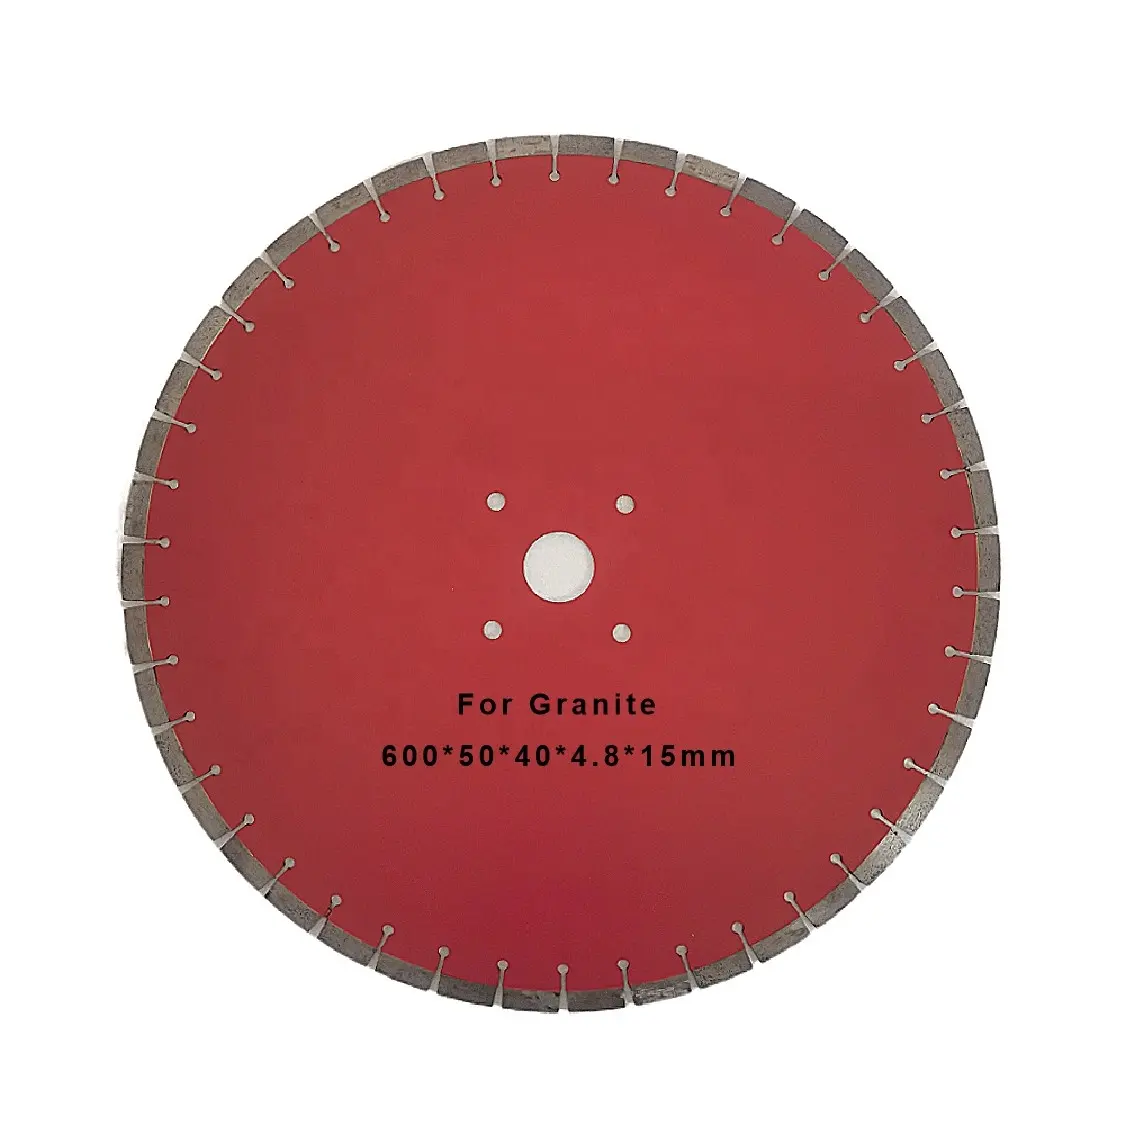 Stable Cutter Performance Large Blade 24inch 600mm Power Tools Circular Stone Granite Diamond Saw Blade Cutting Discs